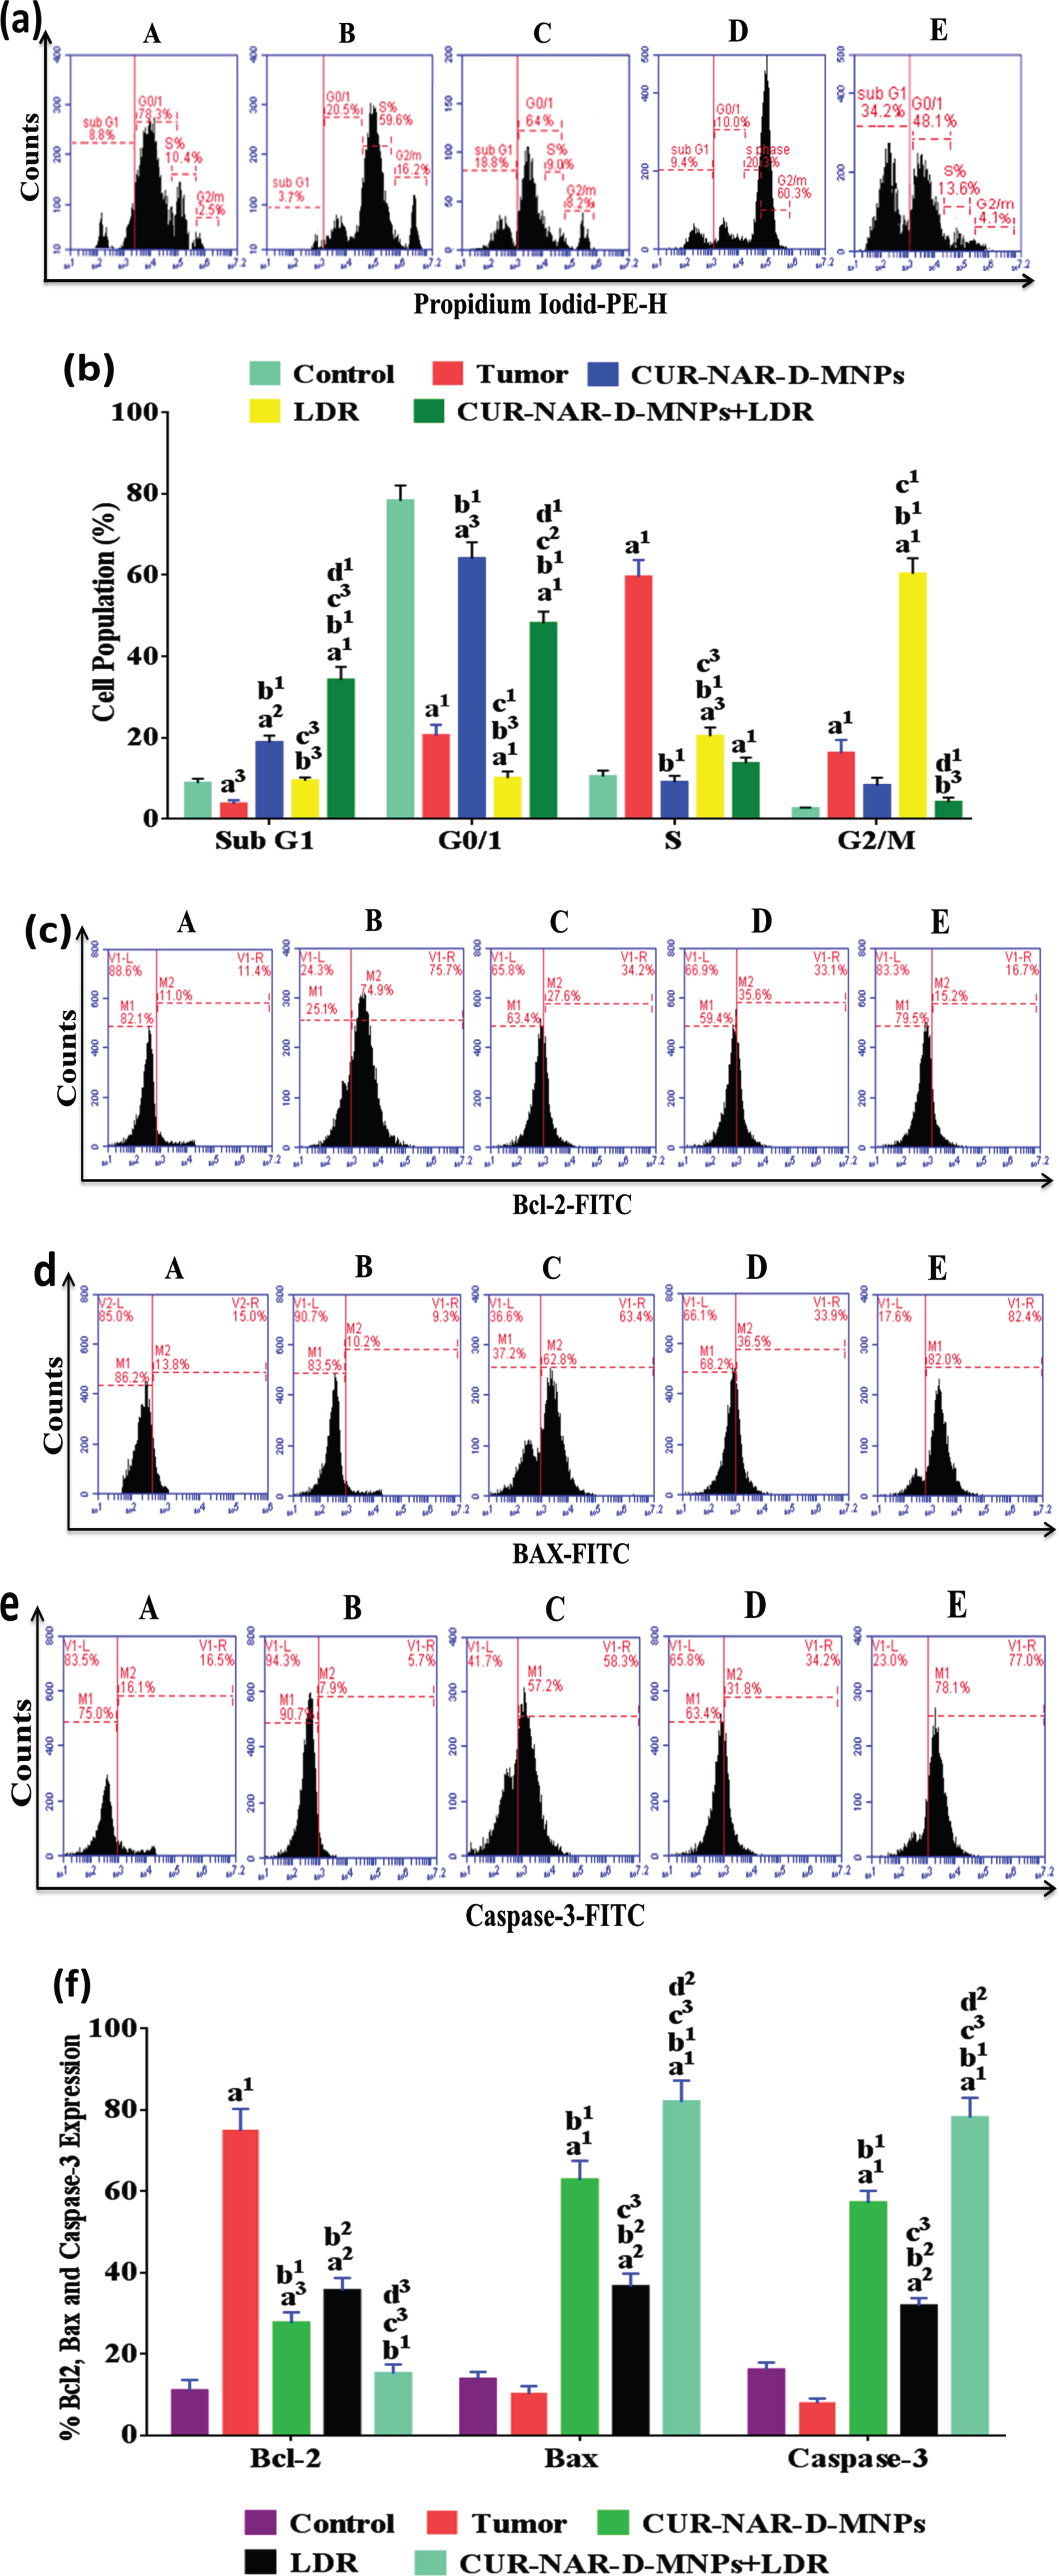 Antitumor mechanism induced by CUR-NAR-D-MNPs and/or LDR in rats via cell cycle arrest and apoptosis. (a) Flow cytometric images of cell cycle, (b) bar chart of of cell cycle, (c, d and e) Flow cytometric images of Bcl2, Bax and Caspase-3 respectively, (f) bar chart of accumulated data of Bcl2, Bax and Caspase-3. A, B, C, D and E) represent control, Tumor, CUR-NAR-D-MNPs, LDR and combination groups. The results presented as the mean±SEM, n = 5. a1p < 0.001, a2p < 0.01, a3p < 0.05 vs. control; b1p < 0.001, b2p < 0.01, b3p < 0.05 vs. Tumor group; c1p < 0.001, c2p < 0.01, c3p < 0.05 vs. CUR-NAR-D-MNPs group, d1p < 0.001, d2p < 0.01, d3p < 0.05 vs. LDR.